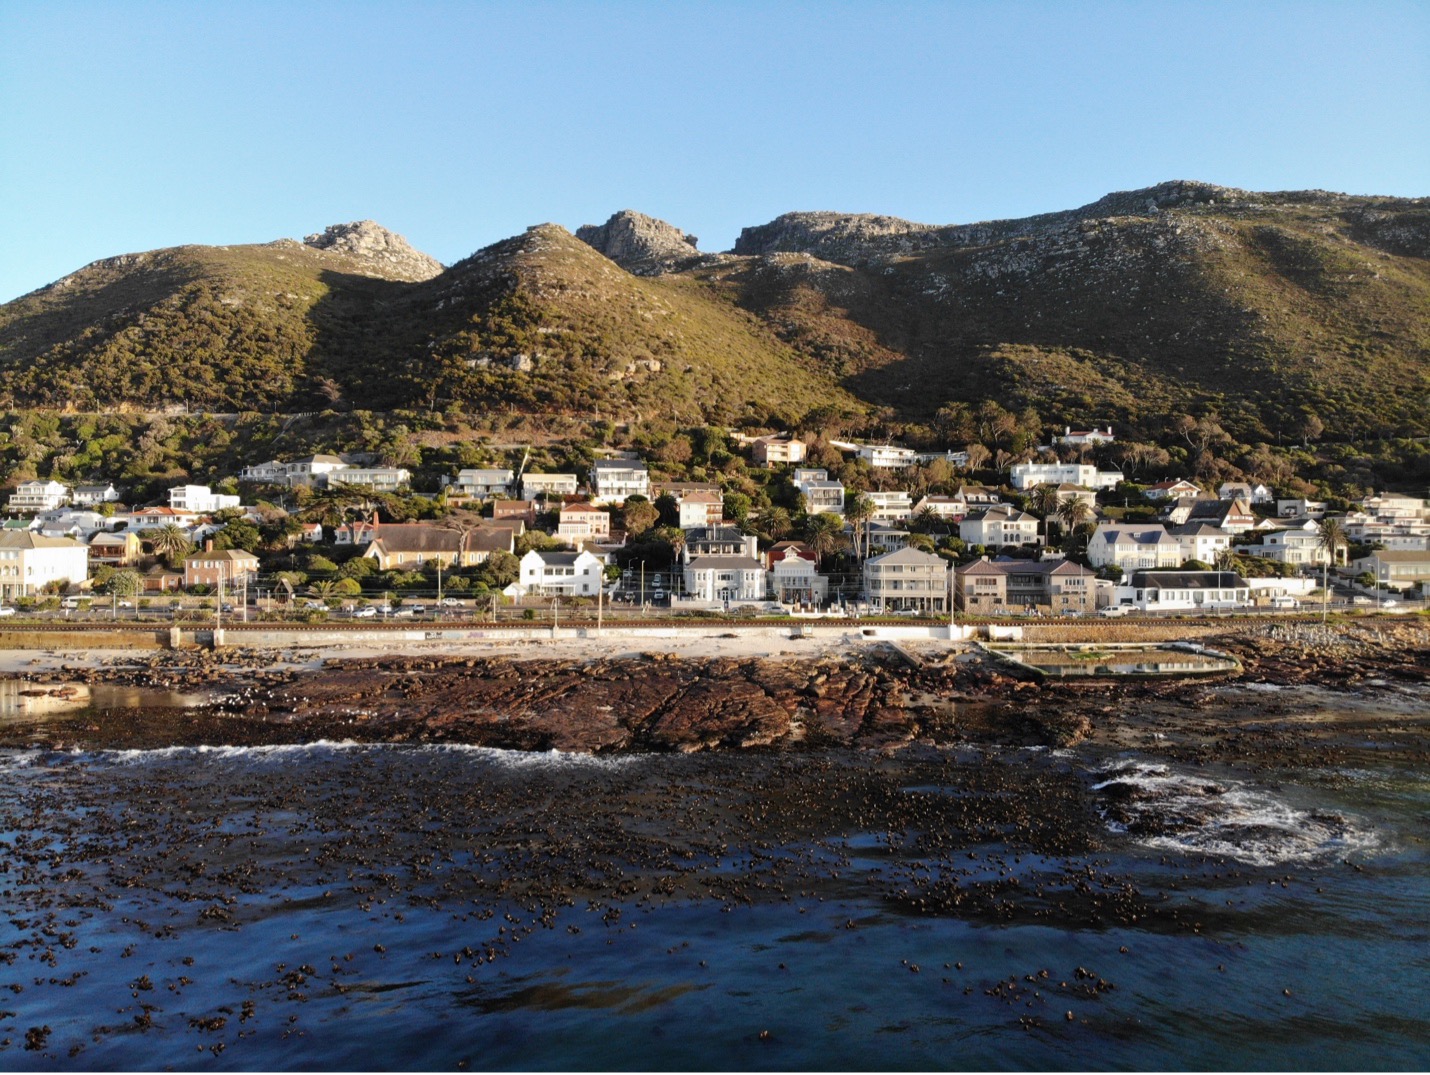 An aerial view of the Dalebrook Marine Protected Area with the beautiful Kalk Bay mountains in the background. Image by Nic Good.